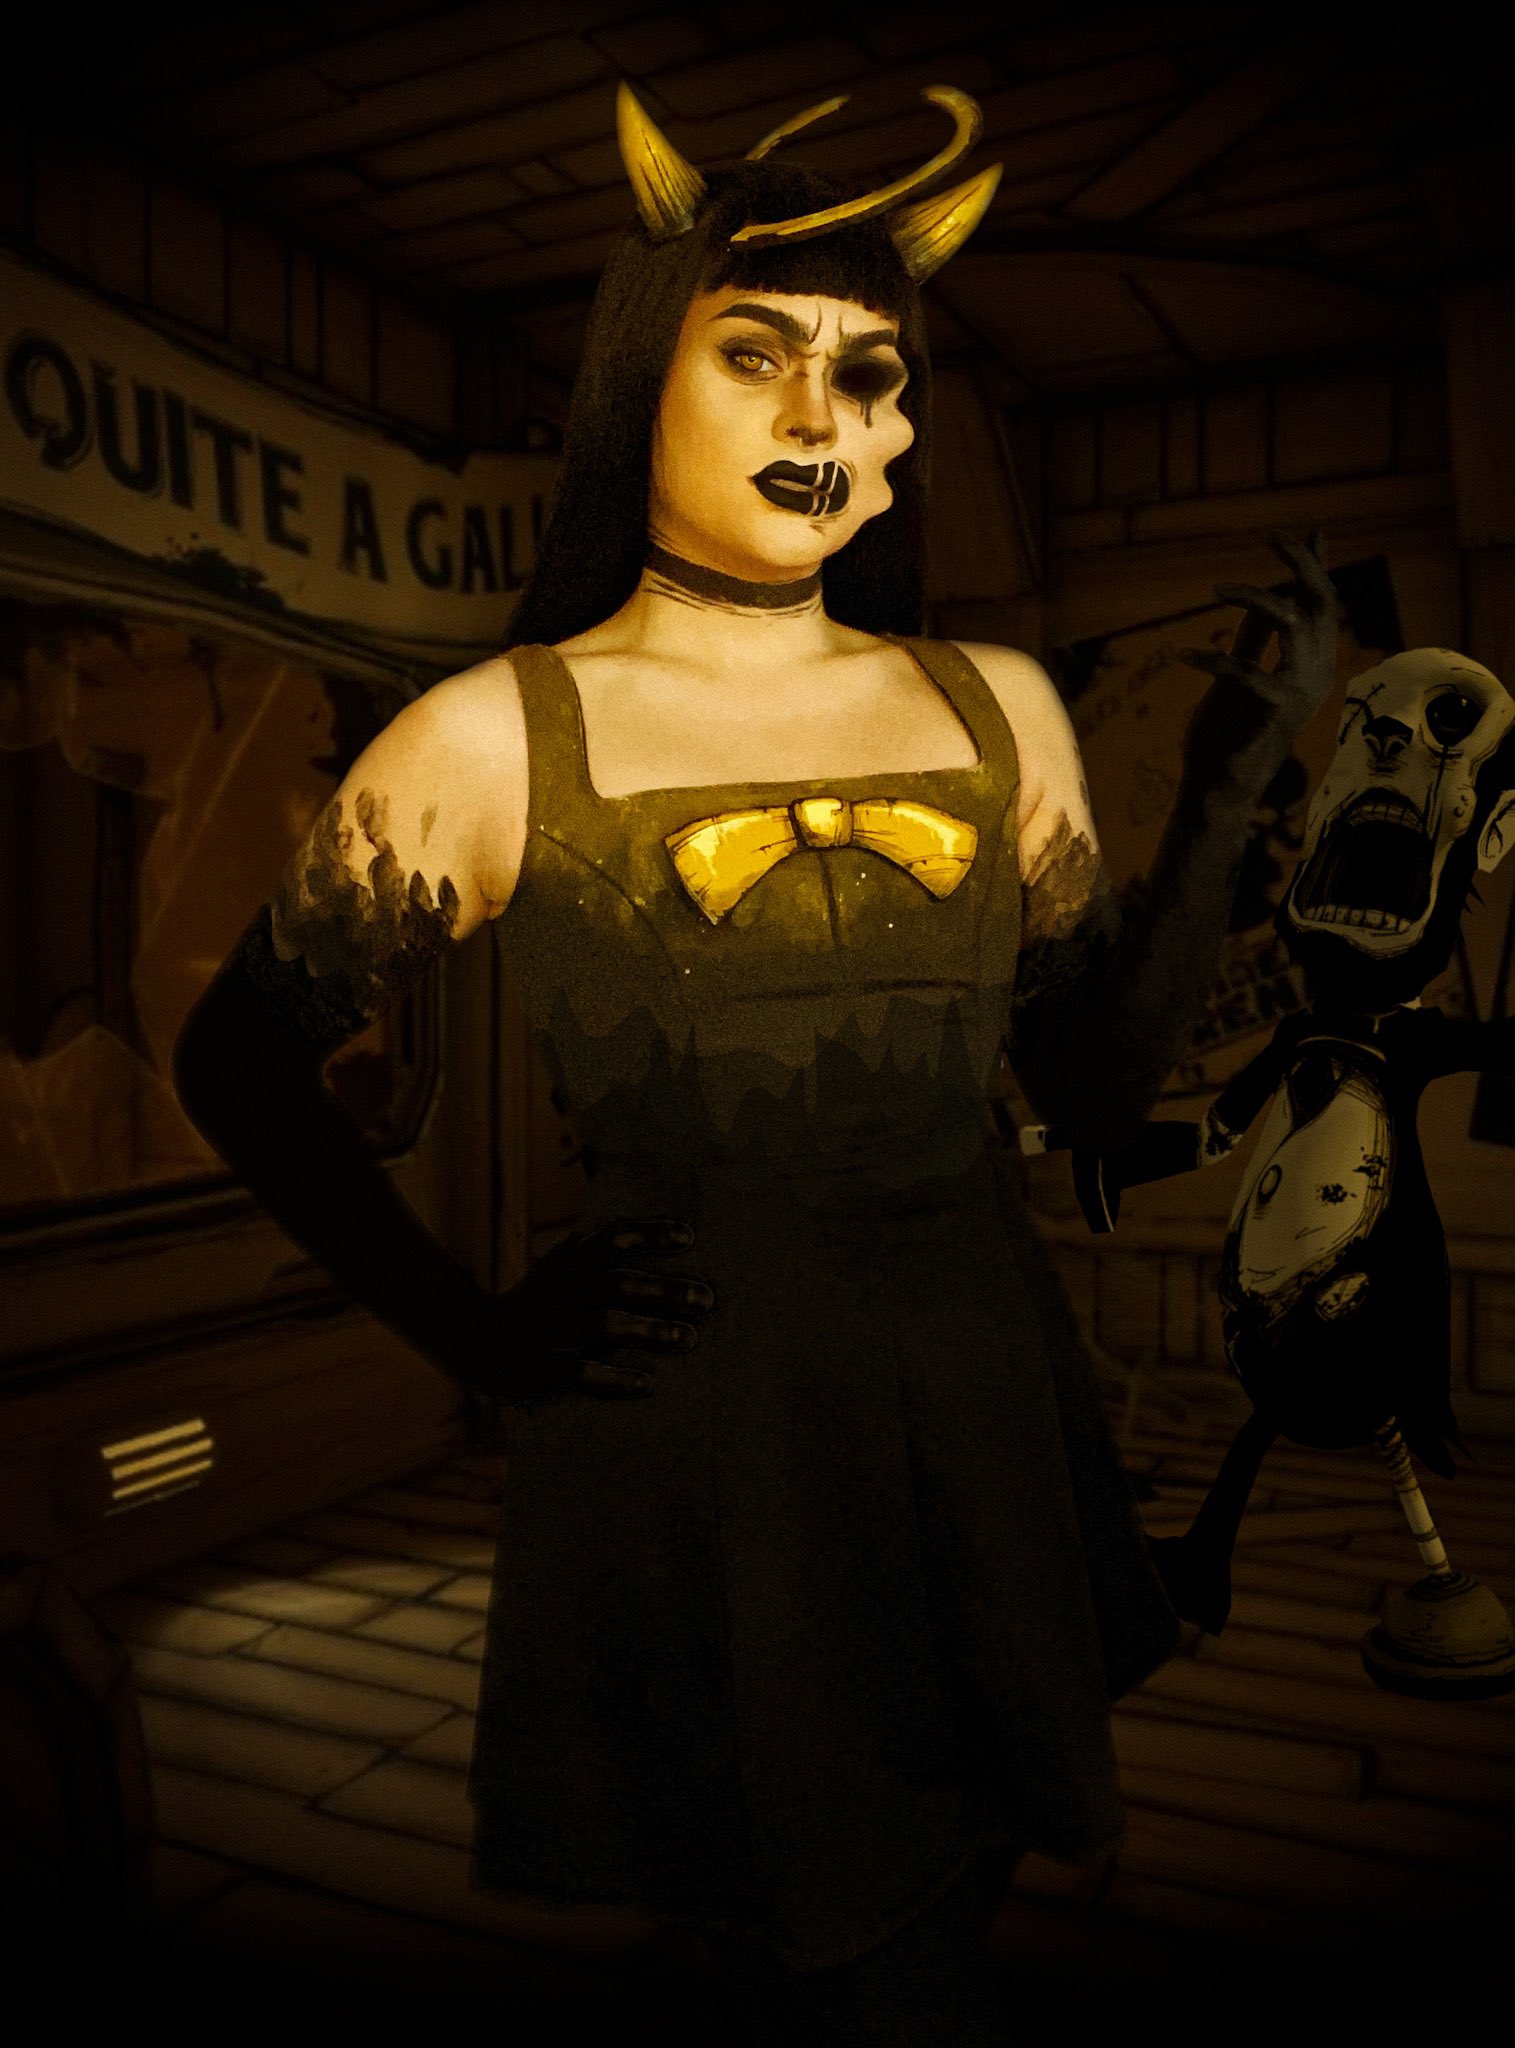 theMeatly on X: "RT @penelopehfx: Now let's see if you're worthy to walk  with angels... 🖋 @Bendy Twisted Alice Angel cosplay! Made, styled,  photographed, a…" / X